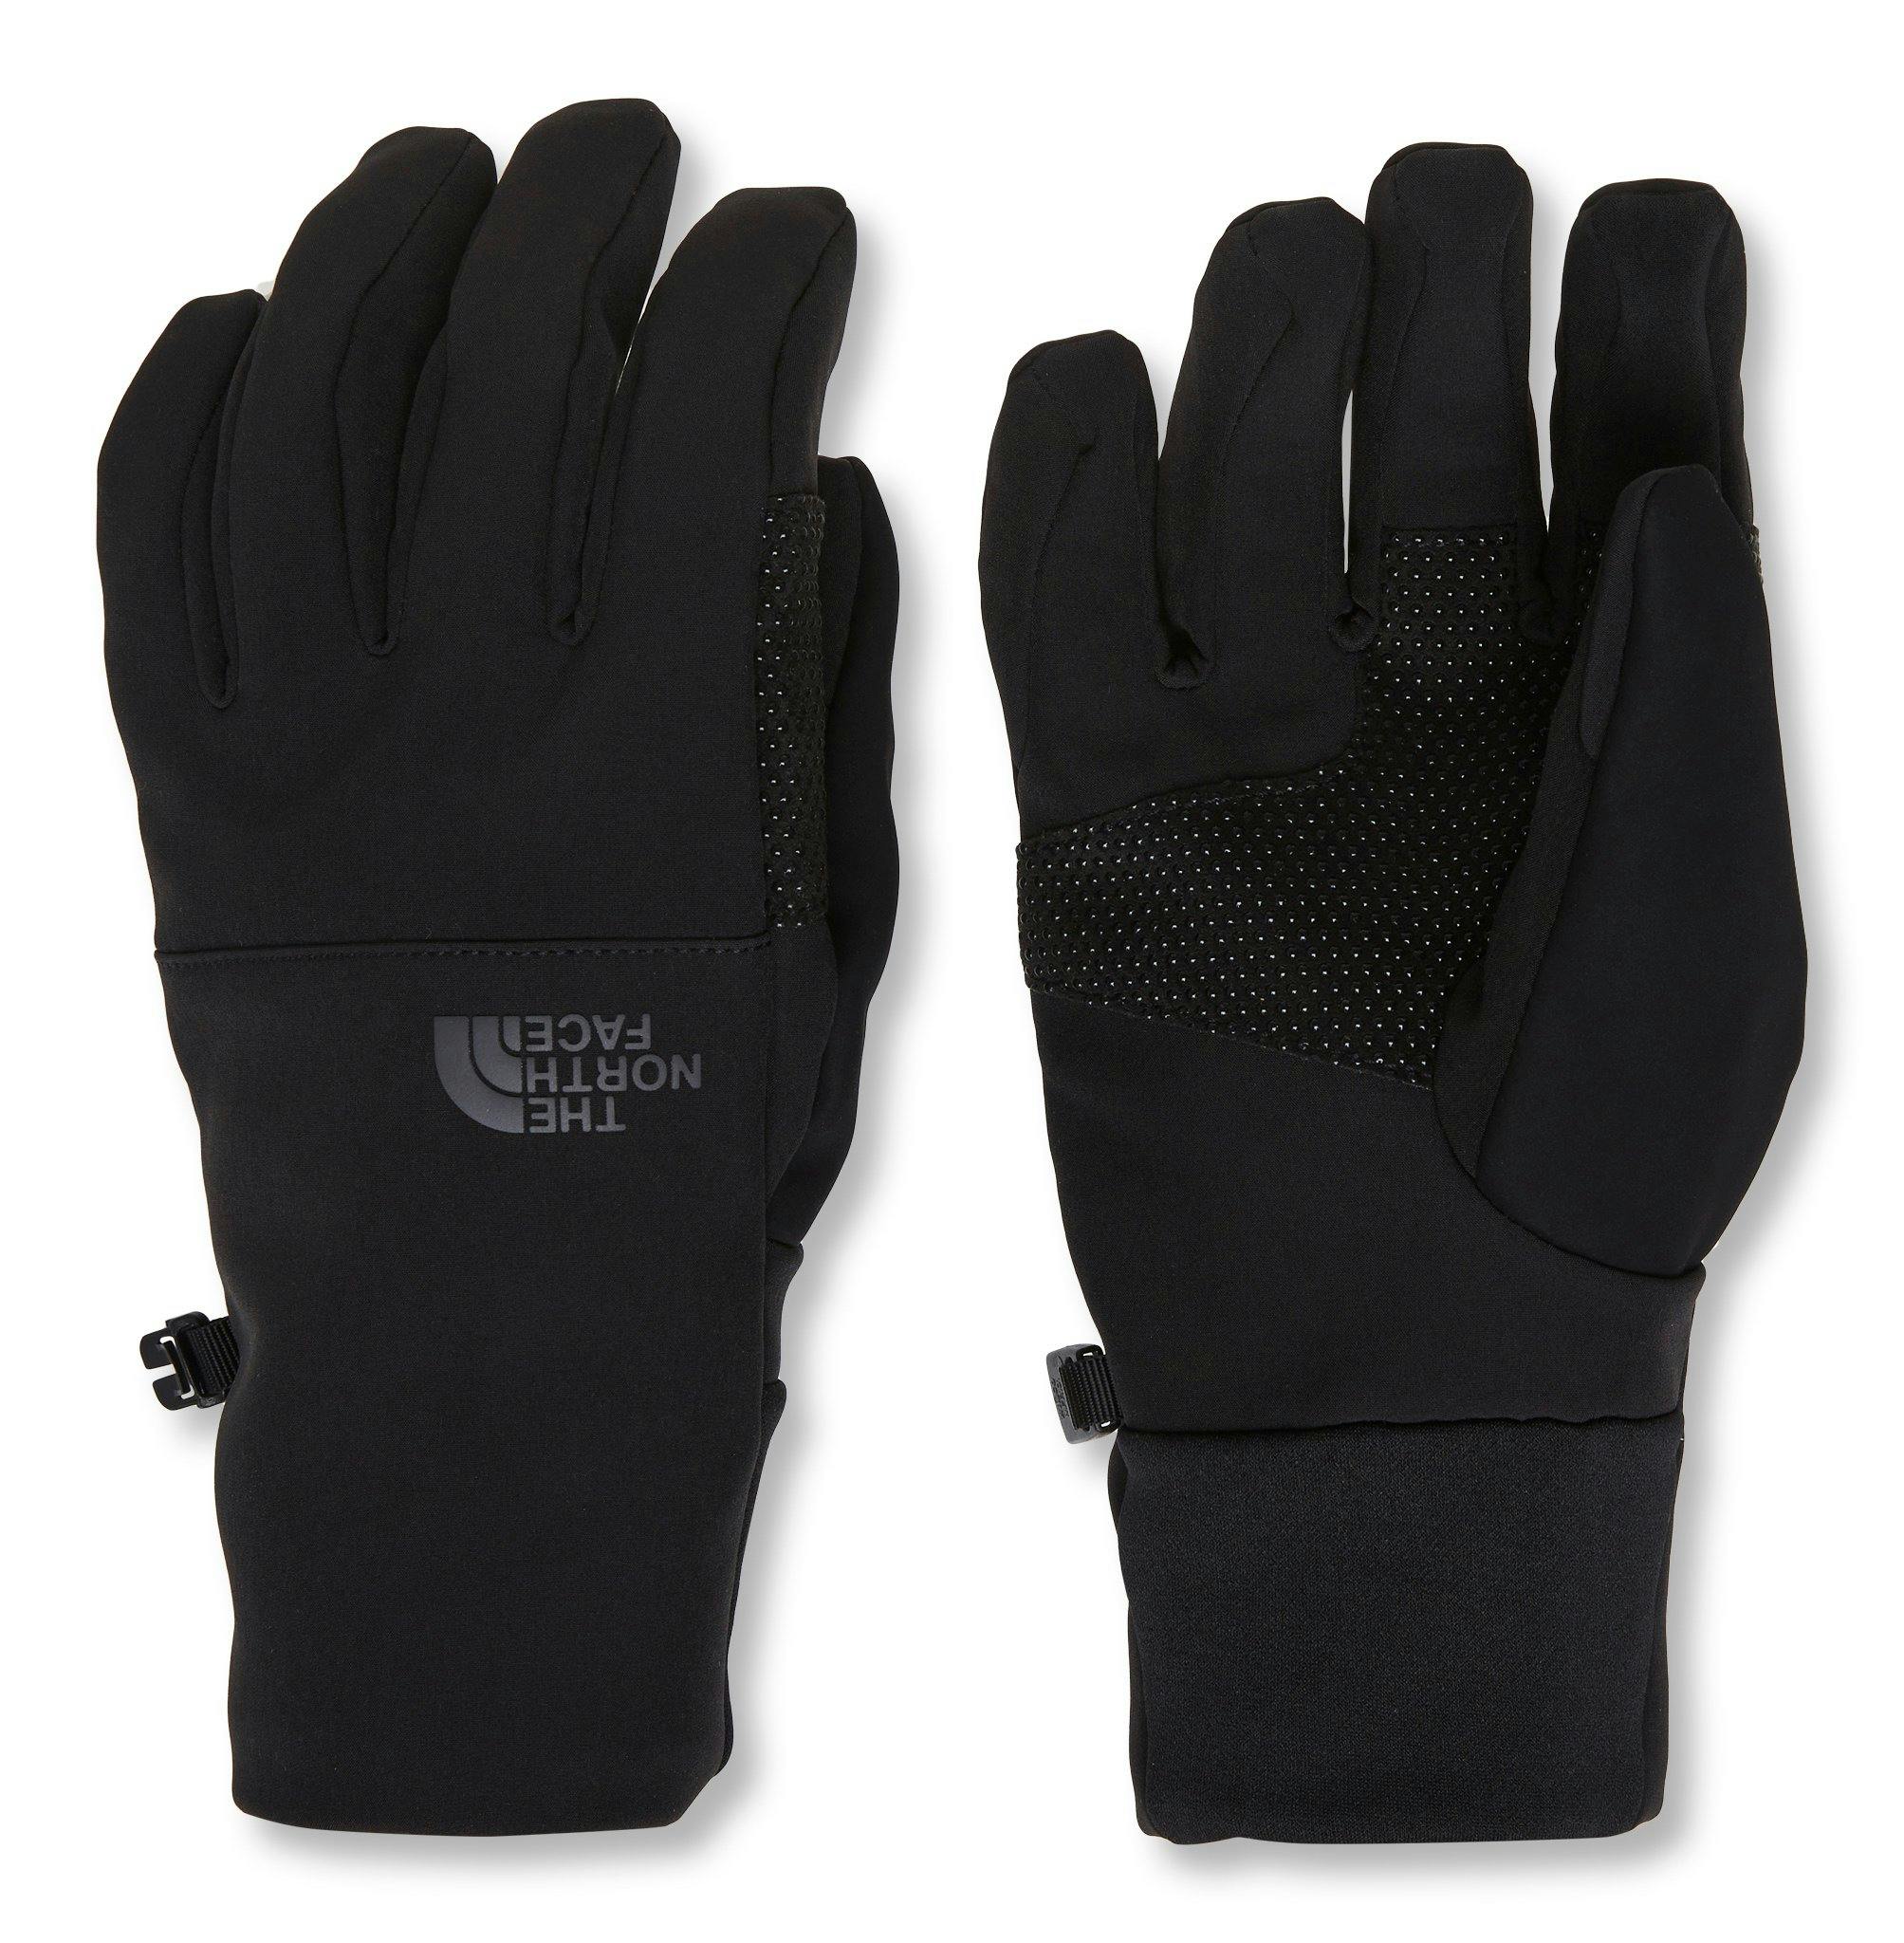 Product image for Apex Etip Insulated Gloves - Women’s